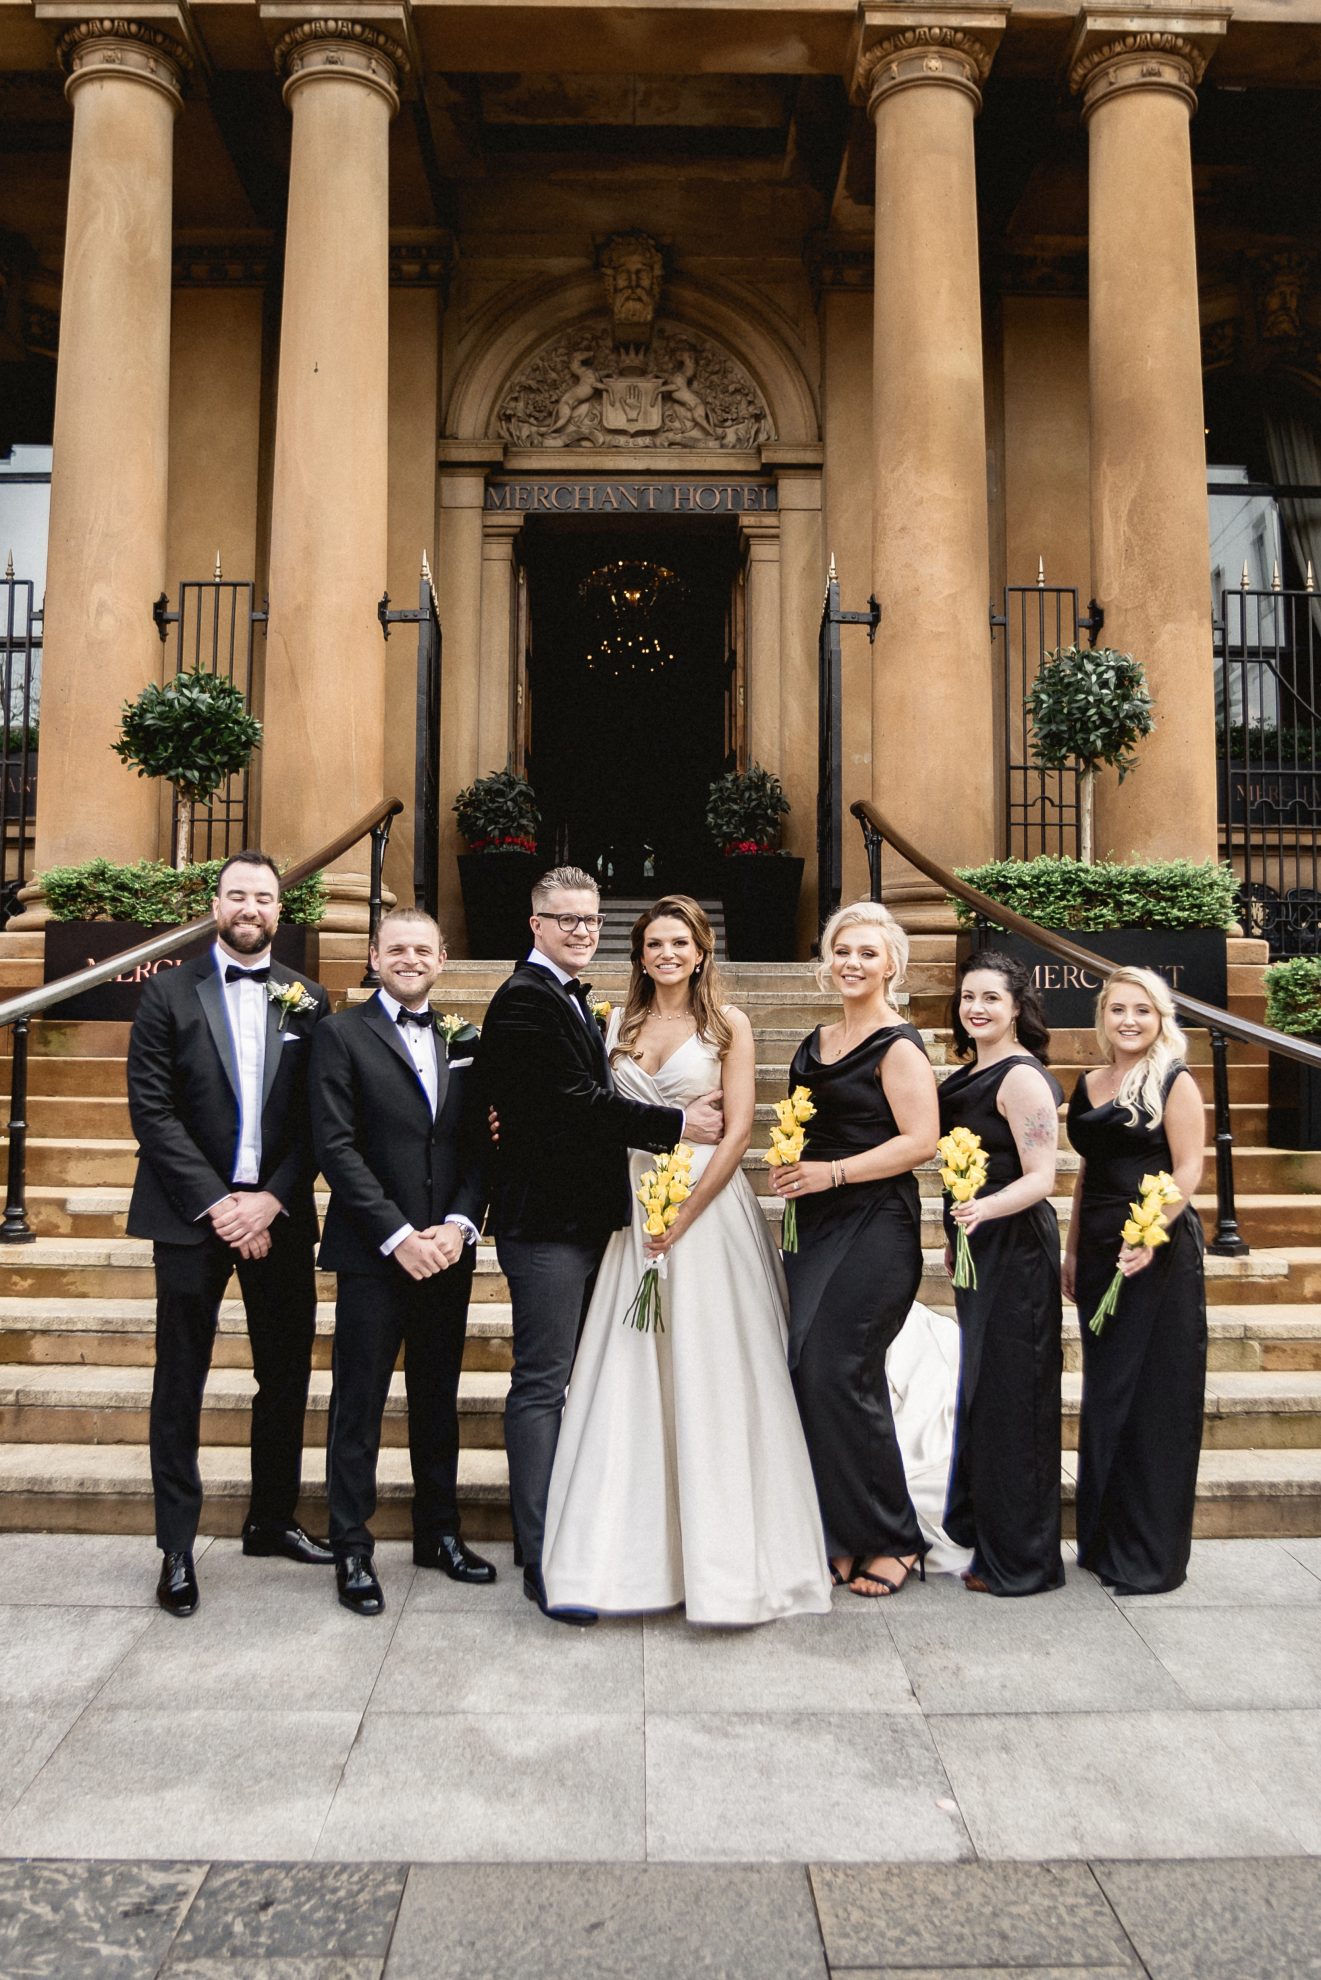 Jordan and Ben with the bridal party